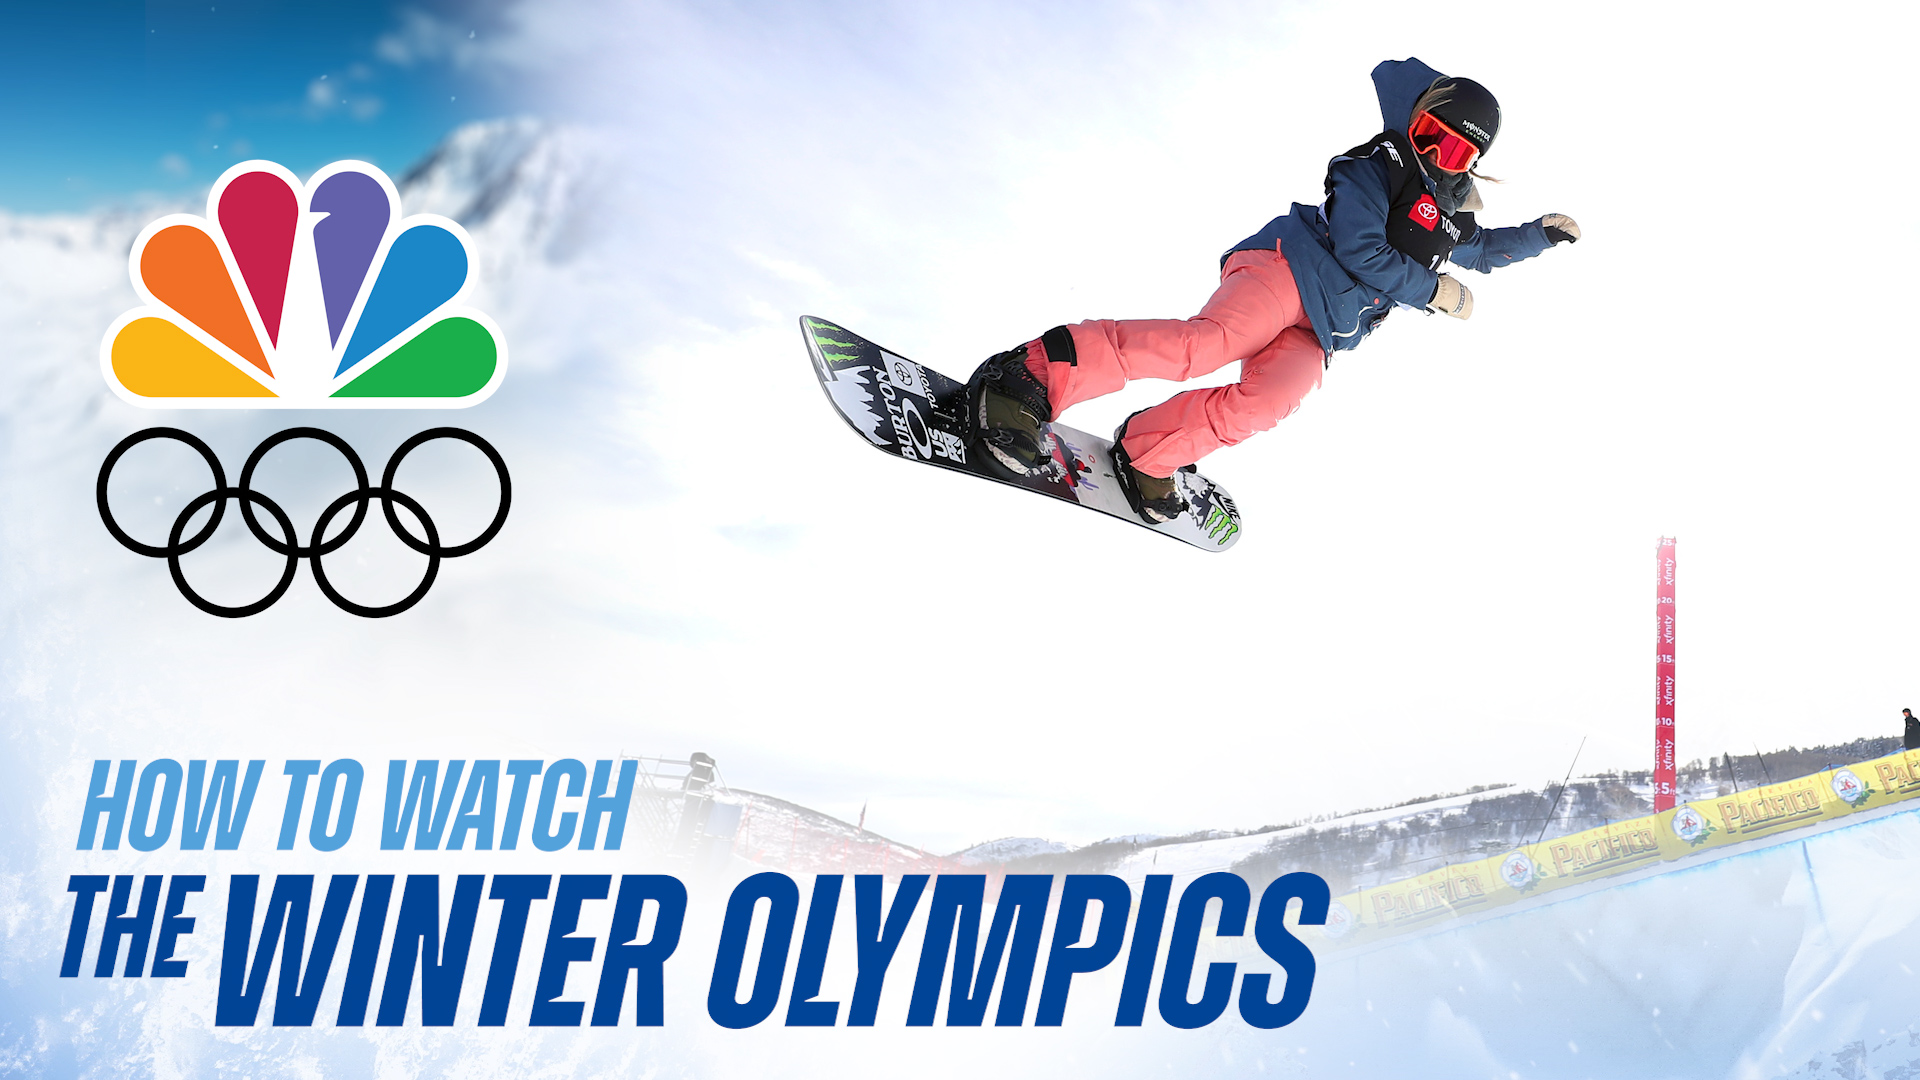 How to Watch the Winter Olympics on Wednesday, Feb